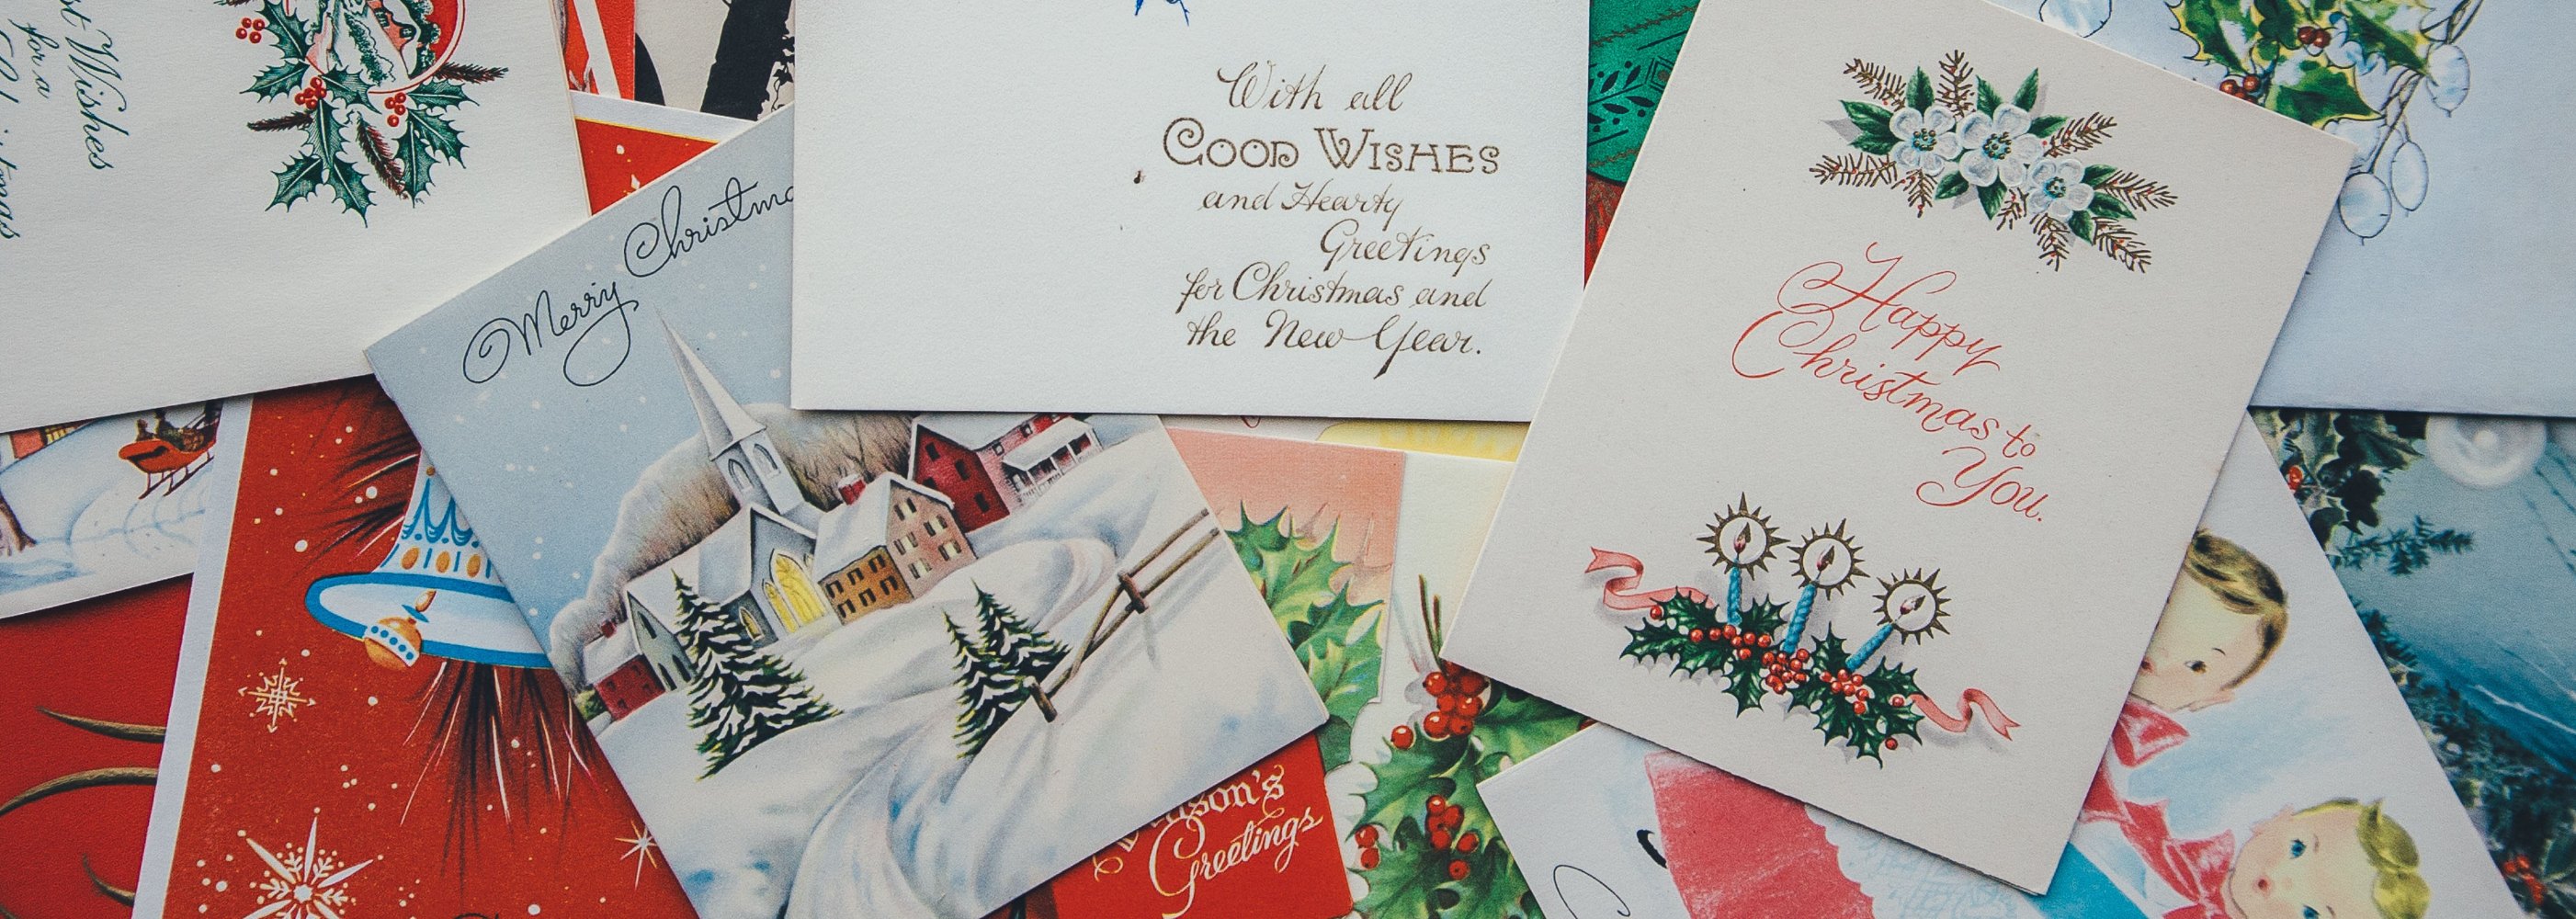 Our sustainable Christmas: how & why we replaced cards with charity donations